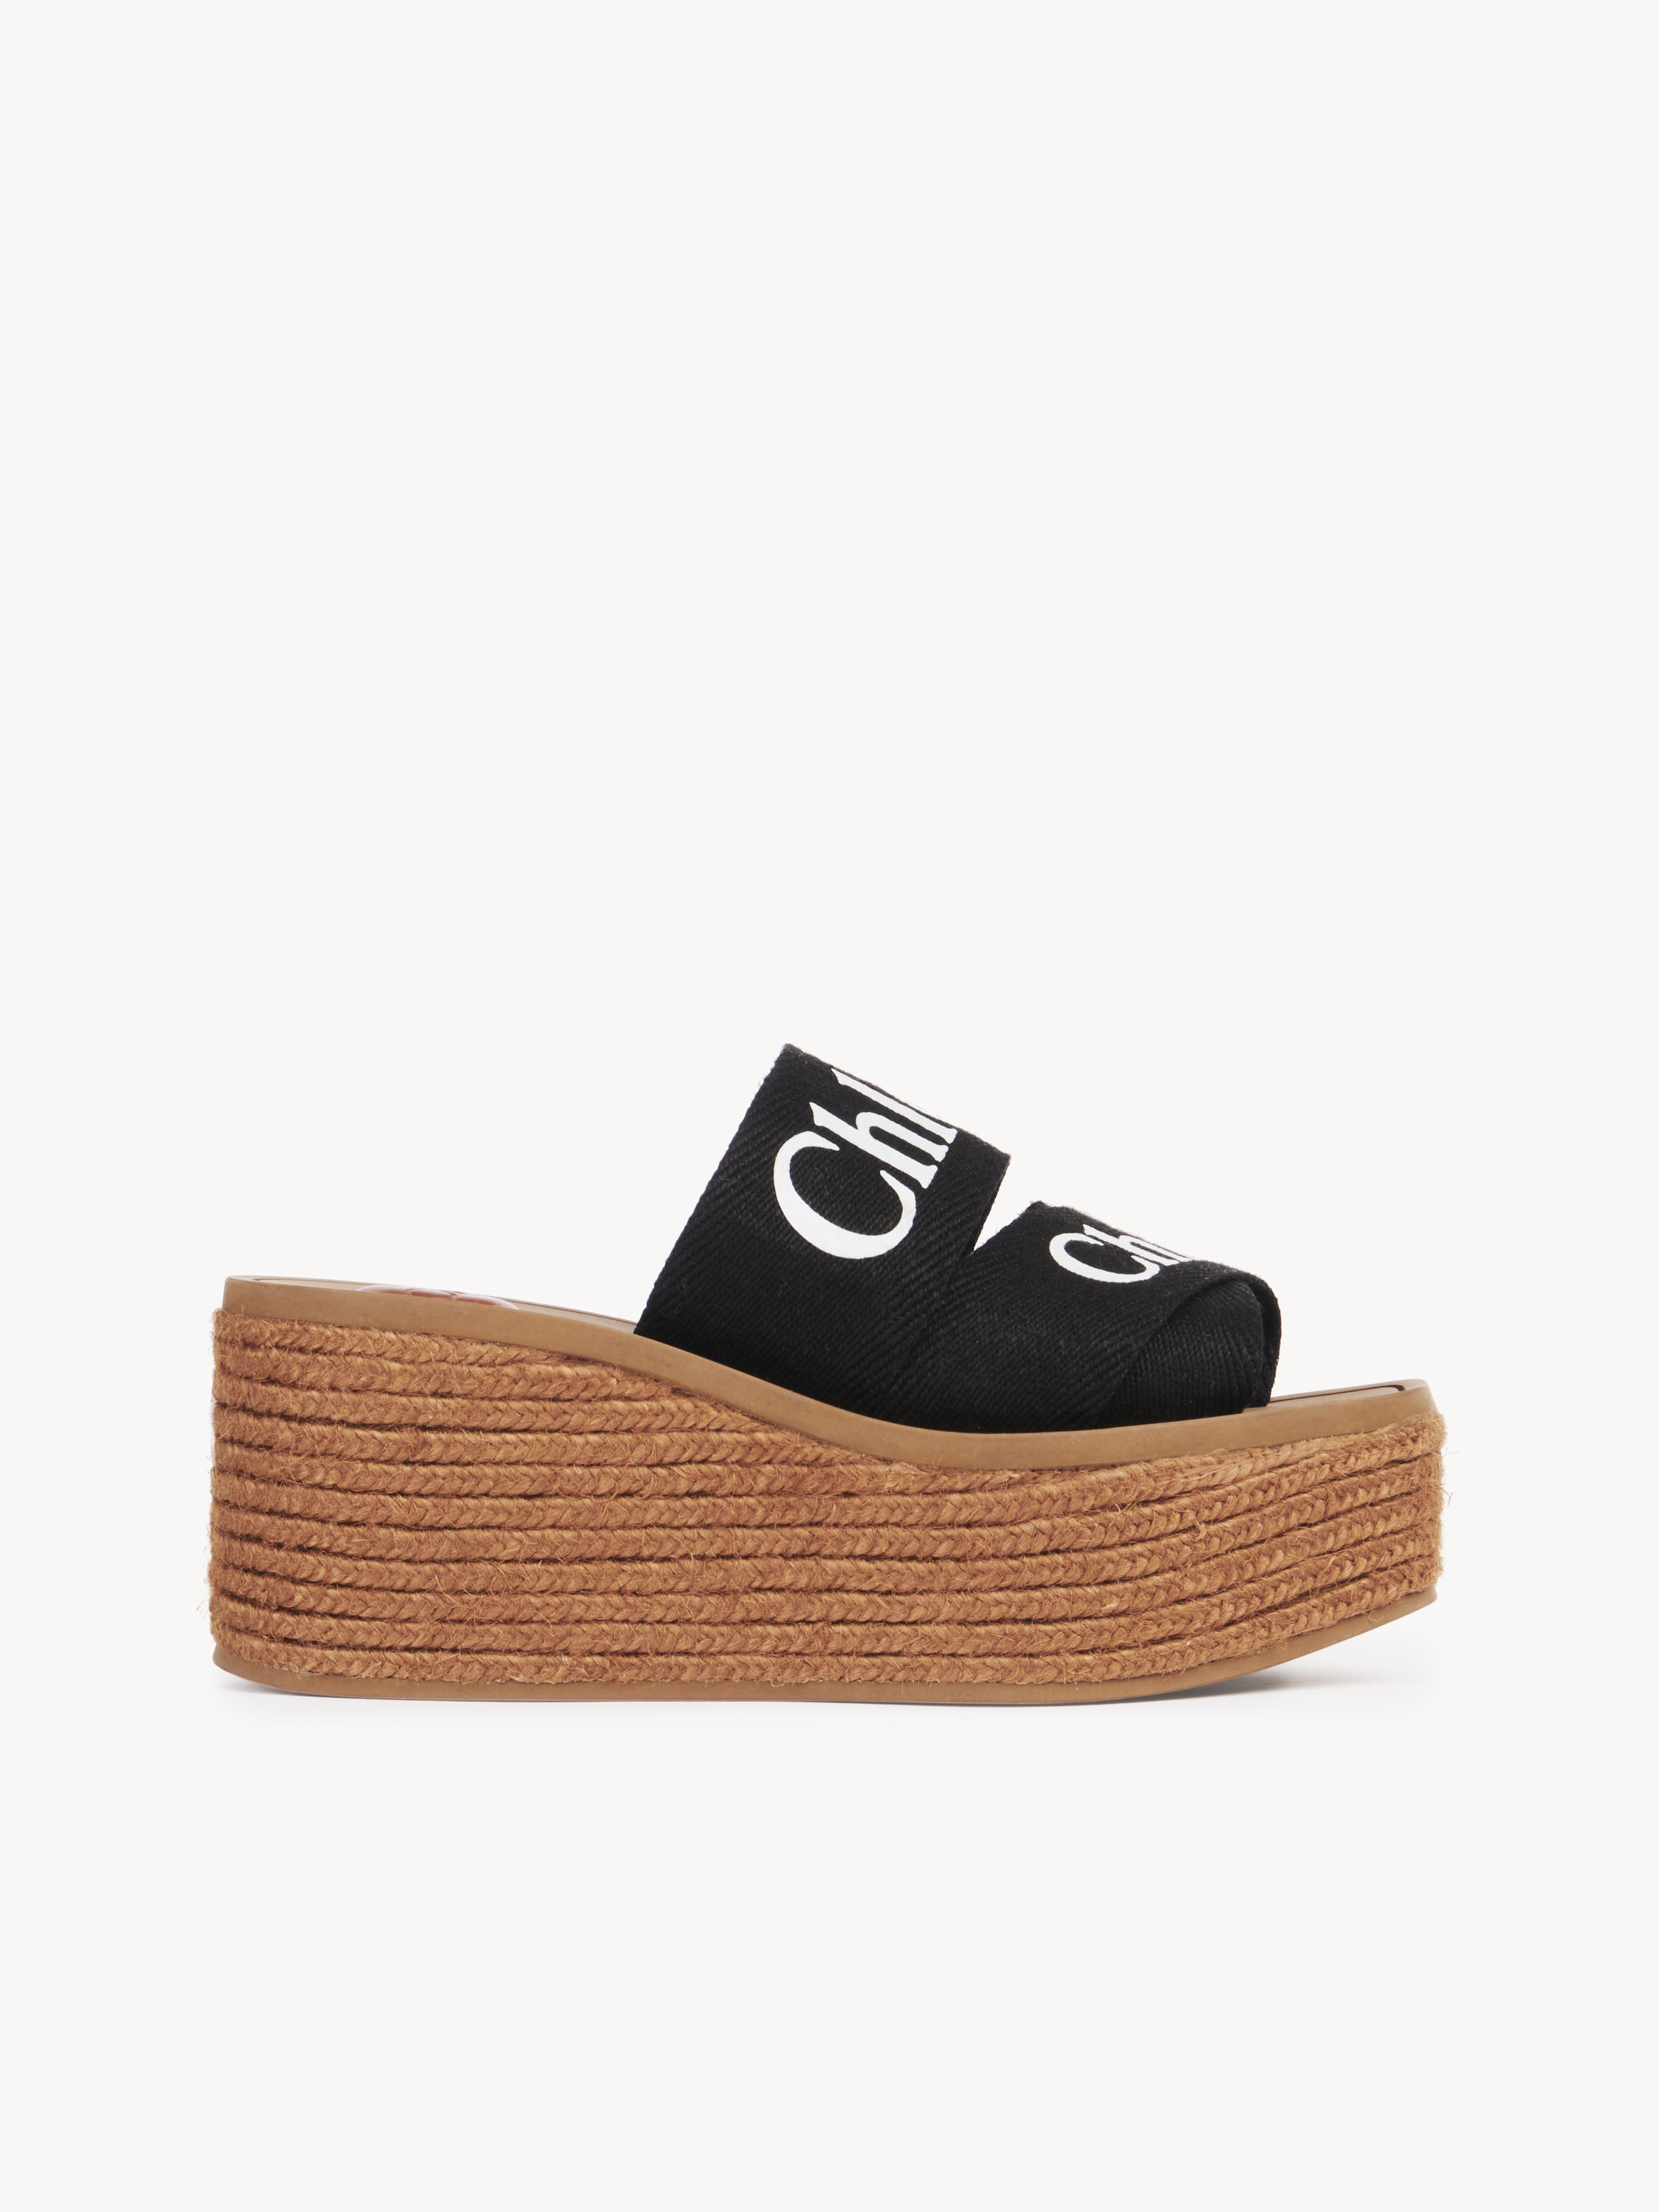 Chloé Mules Espadrilles Woody Femme Noir Taille 37 90% Lin, 10% Polyester, Quercus Suber, Farmed, Coo Spai